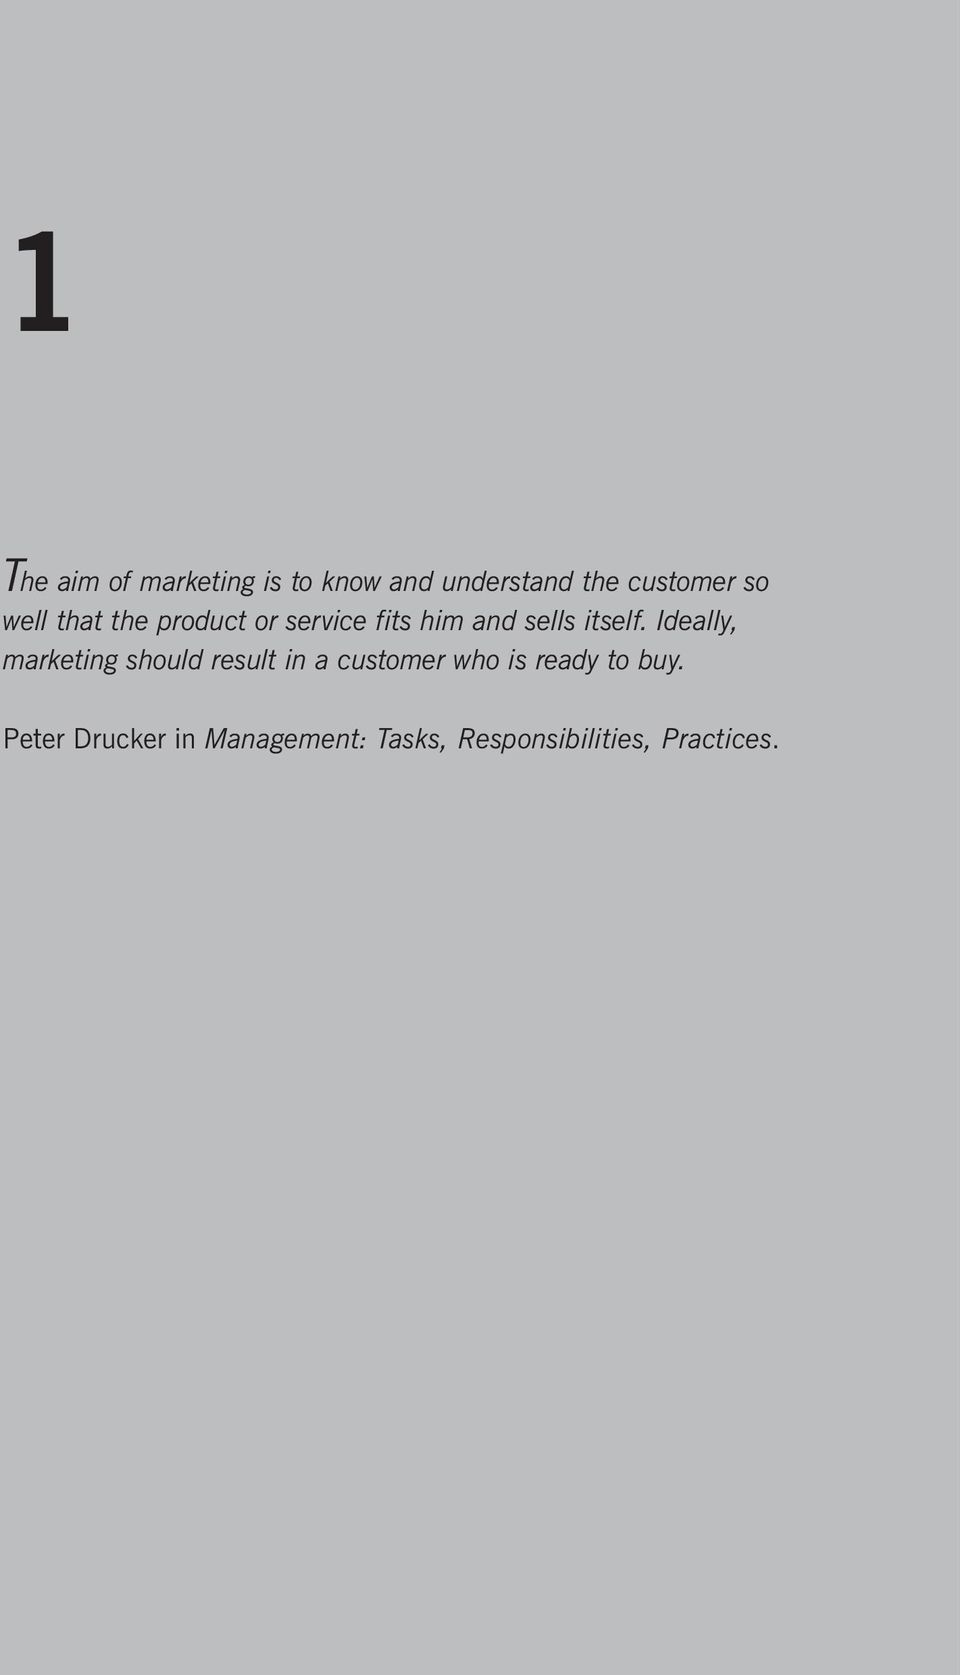 Ideally, marketing should result in a customer who is ready to